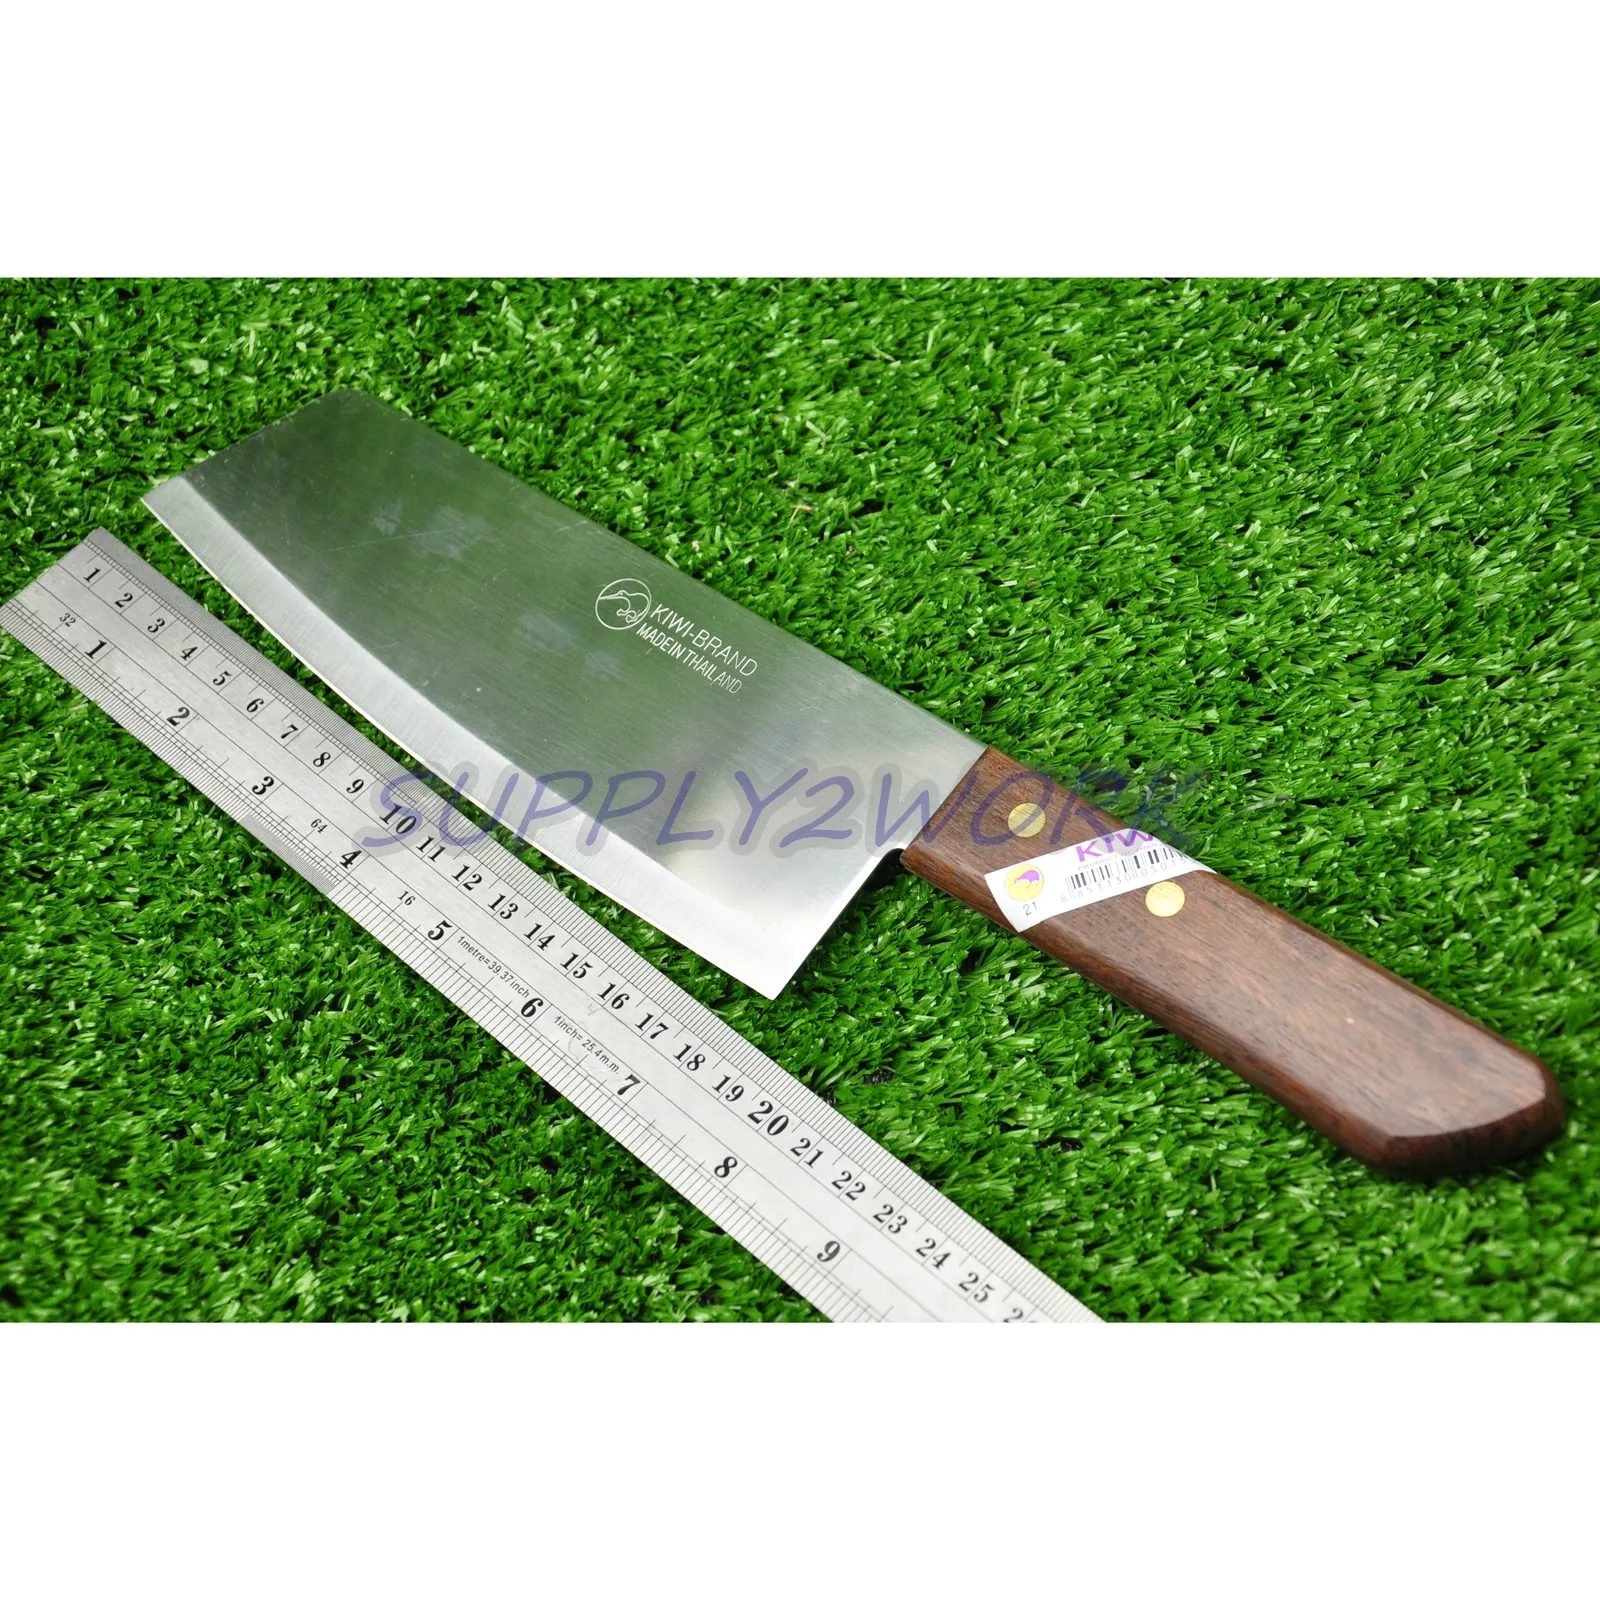 Kiwi Brand Stainless Steel 8 inch Thai Chef's Knife No. 21